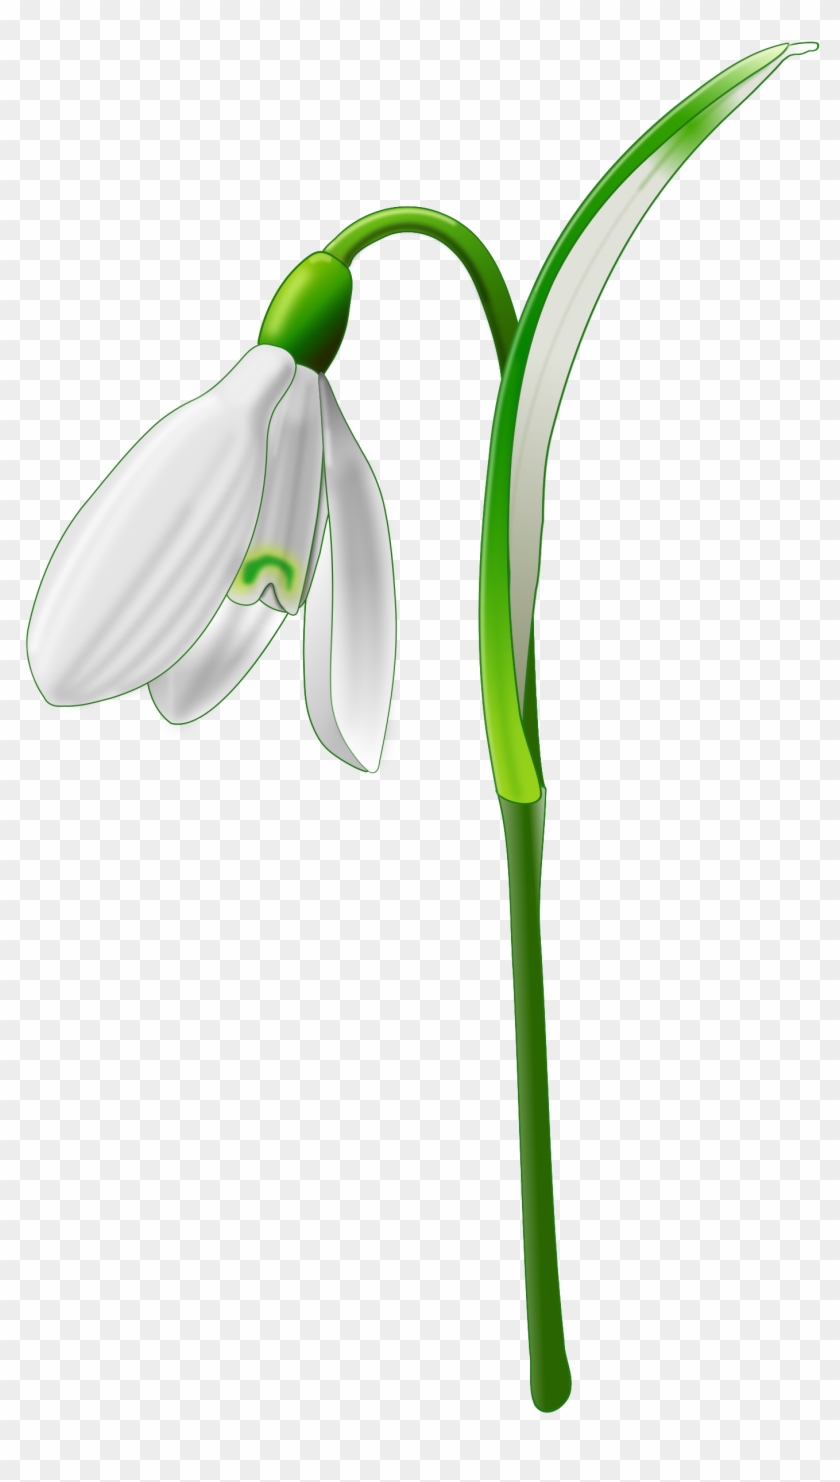 Snowdrop By @andy Gardner, A Snowdrop Drawn On Inkscape - Snowdrop Png #379247